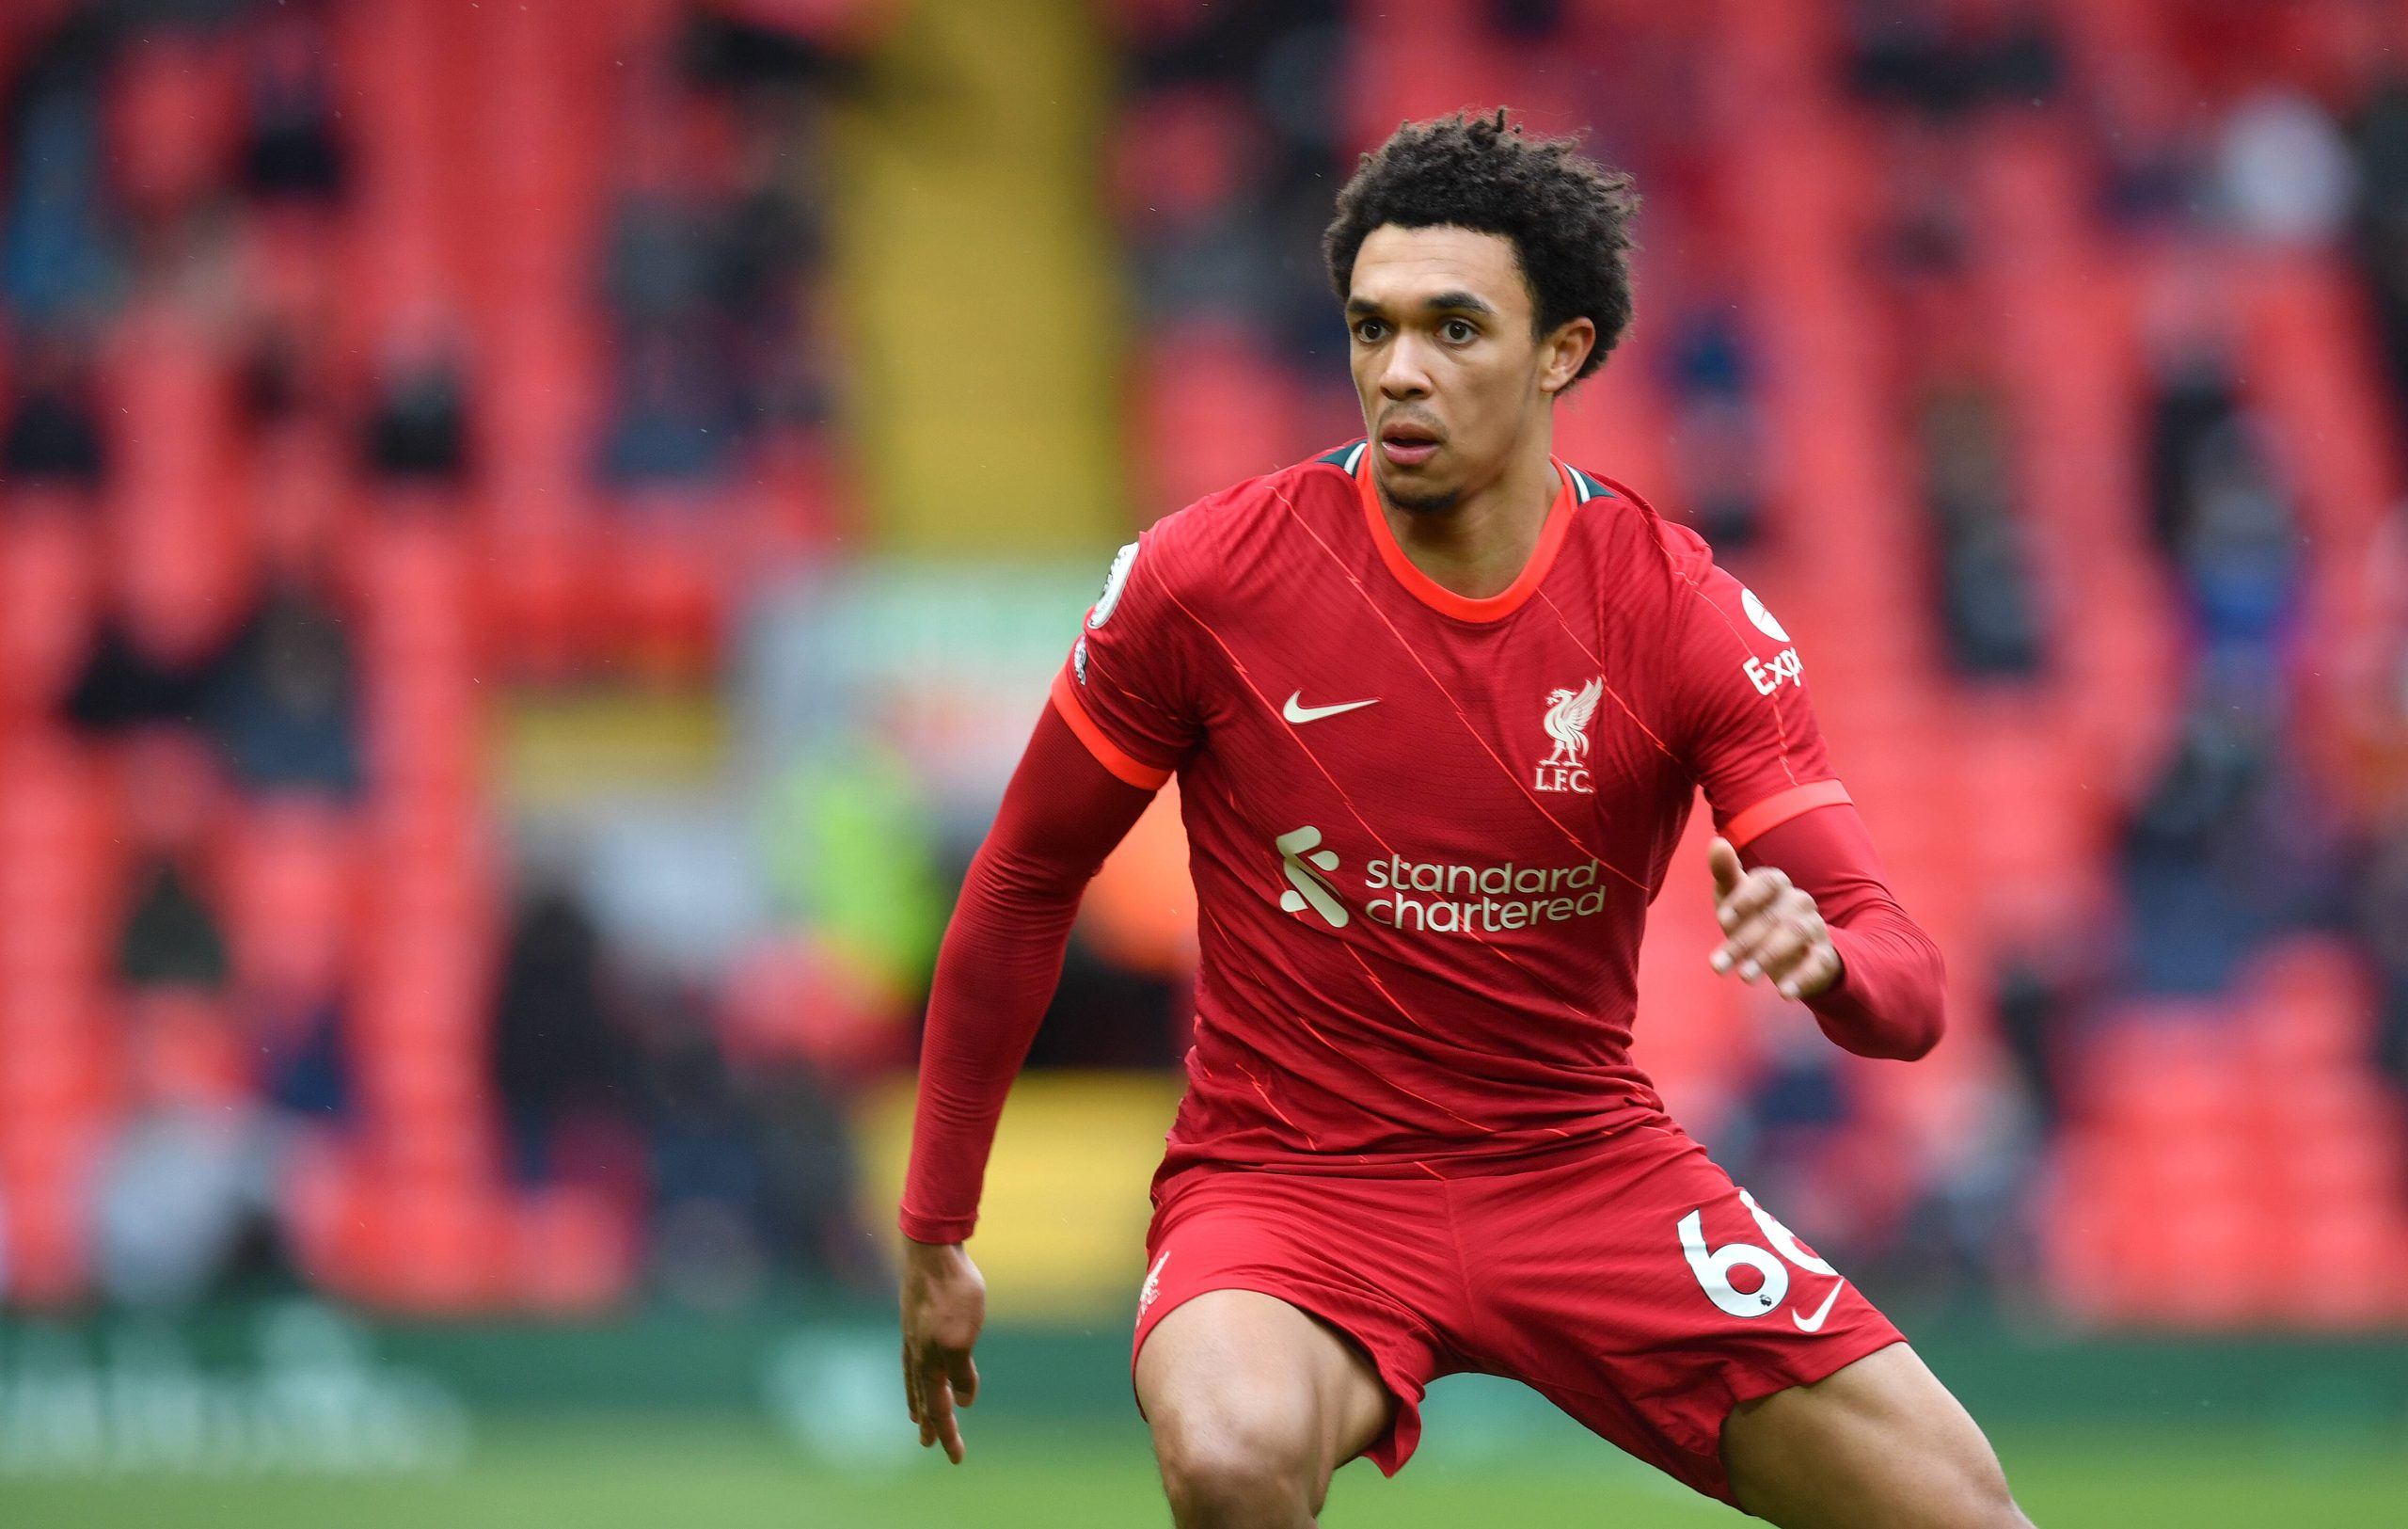 “I think it’s all negotiation” – Liverpool Legend Jamie Carragher Plays Down Trent Alexander-Arnold to Real Madrid Rumors